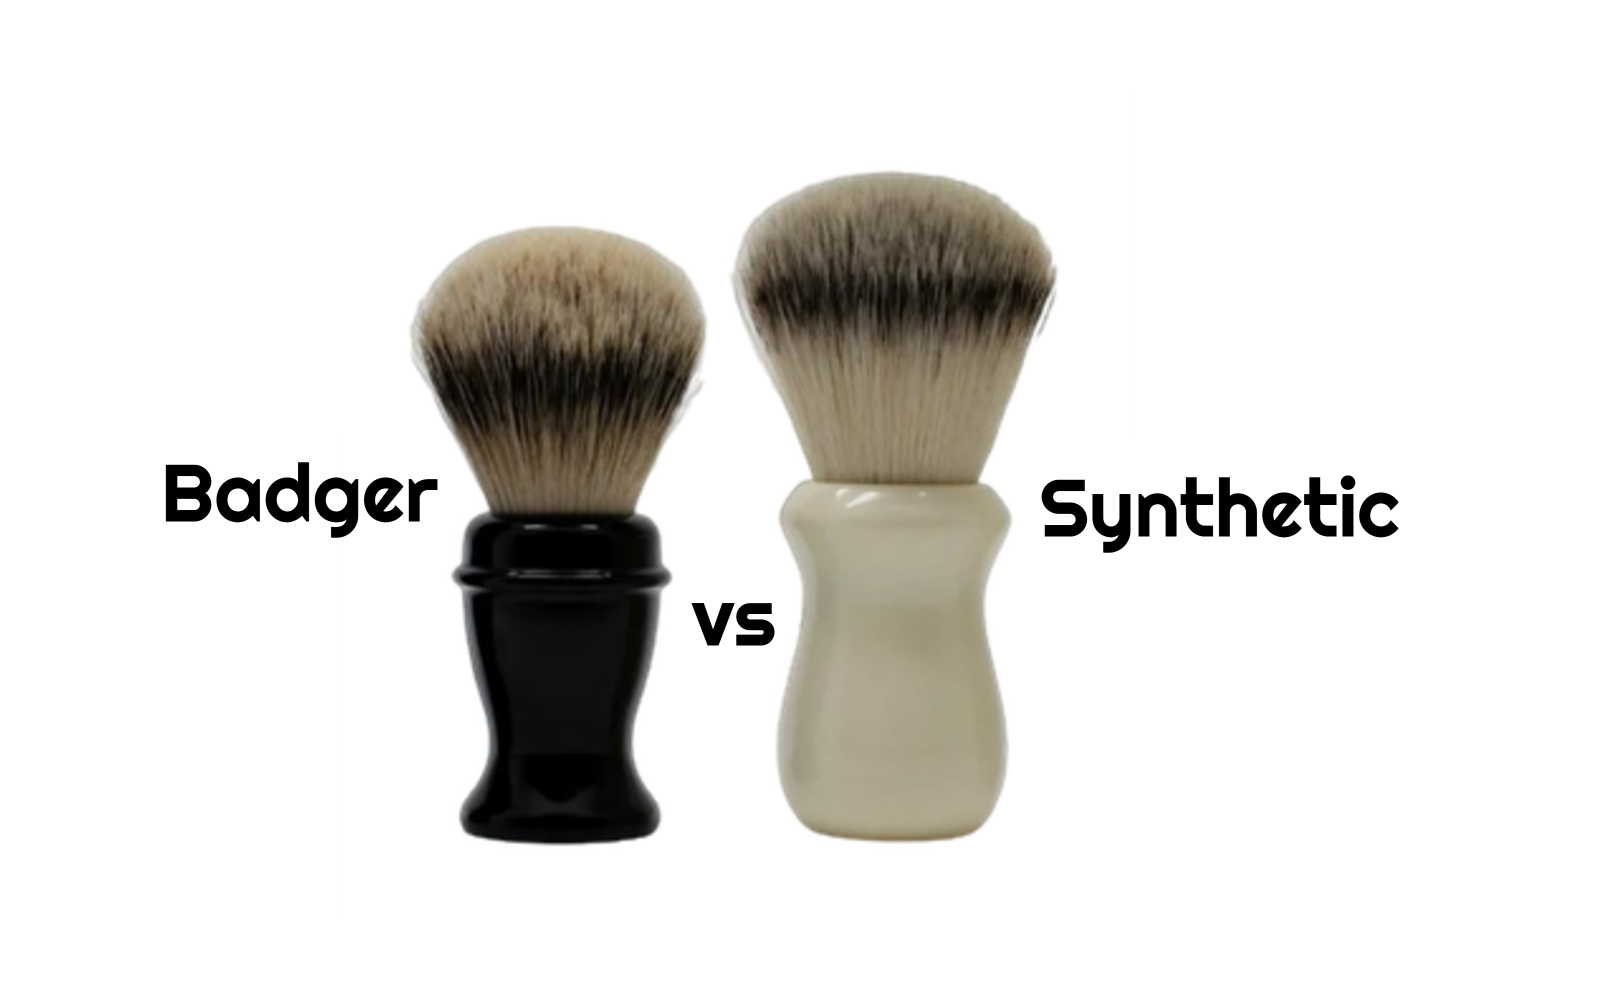 Badger or Synthetic Shaving Brush: Which One To Buy?